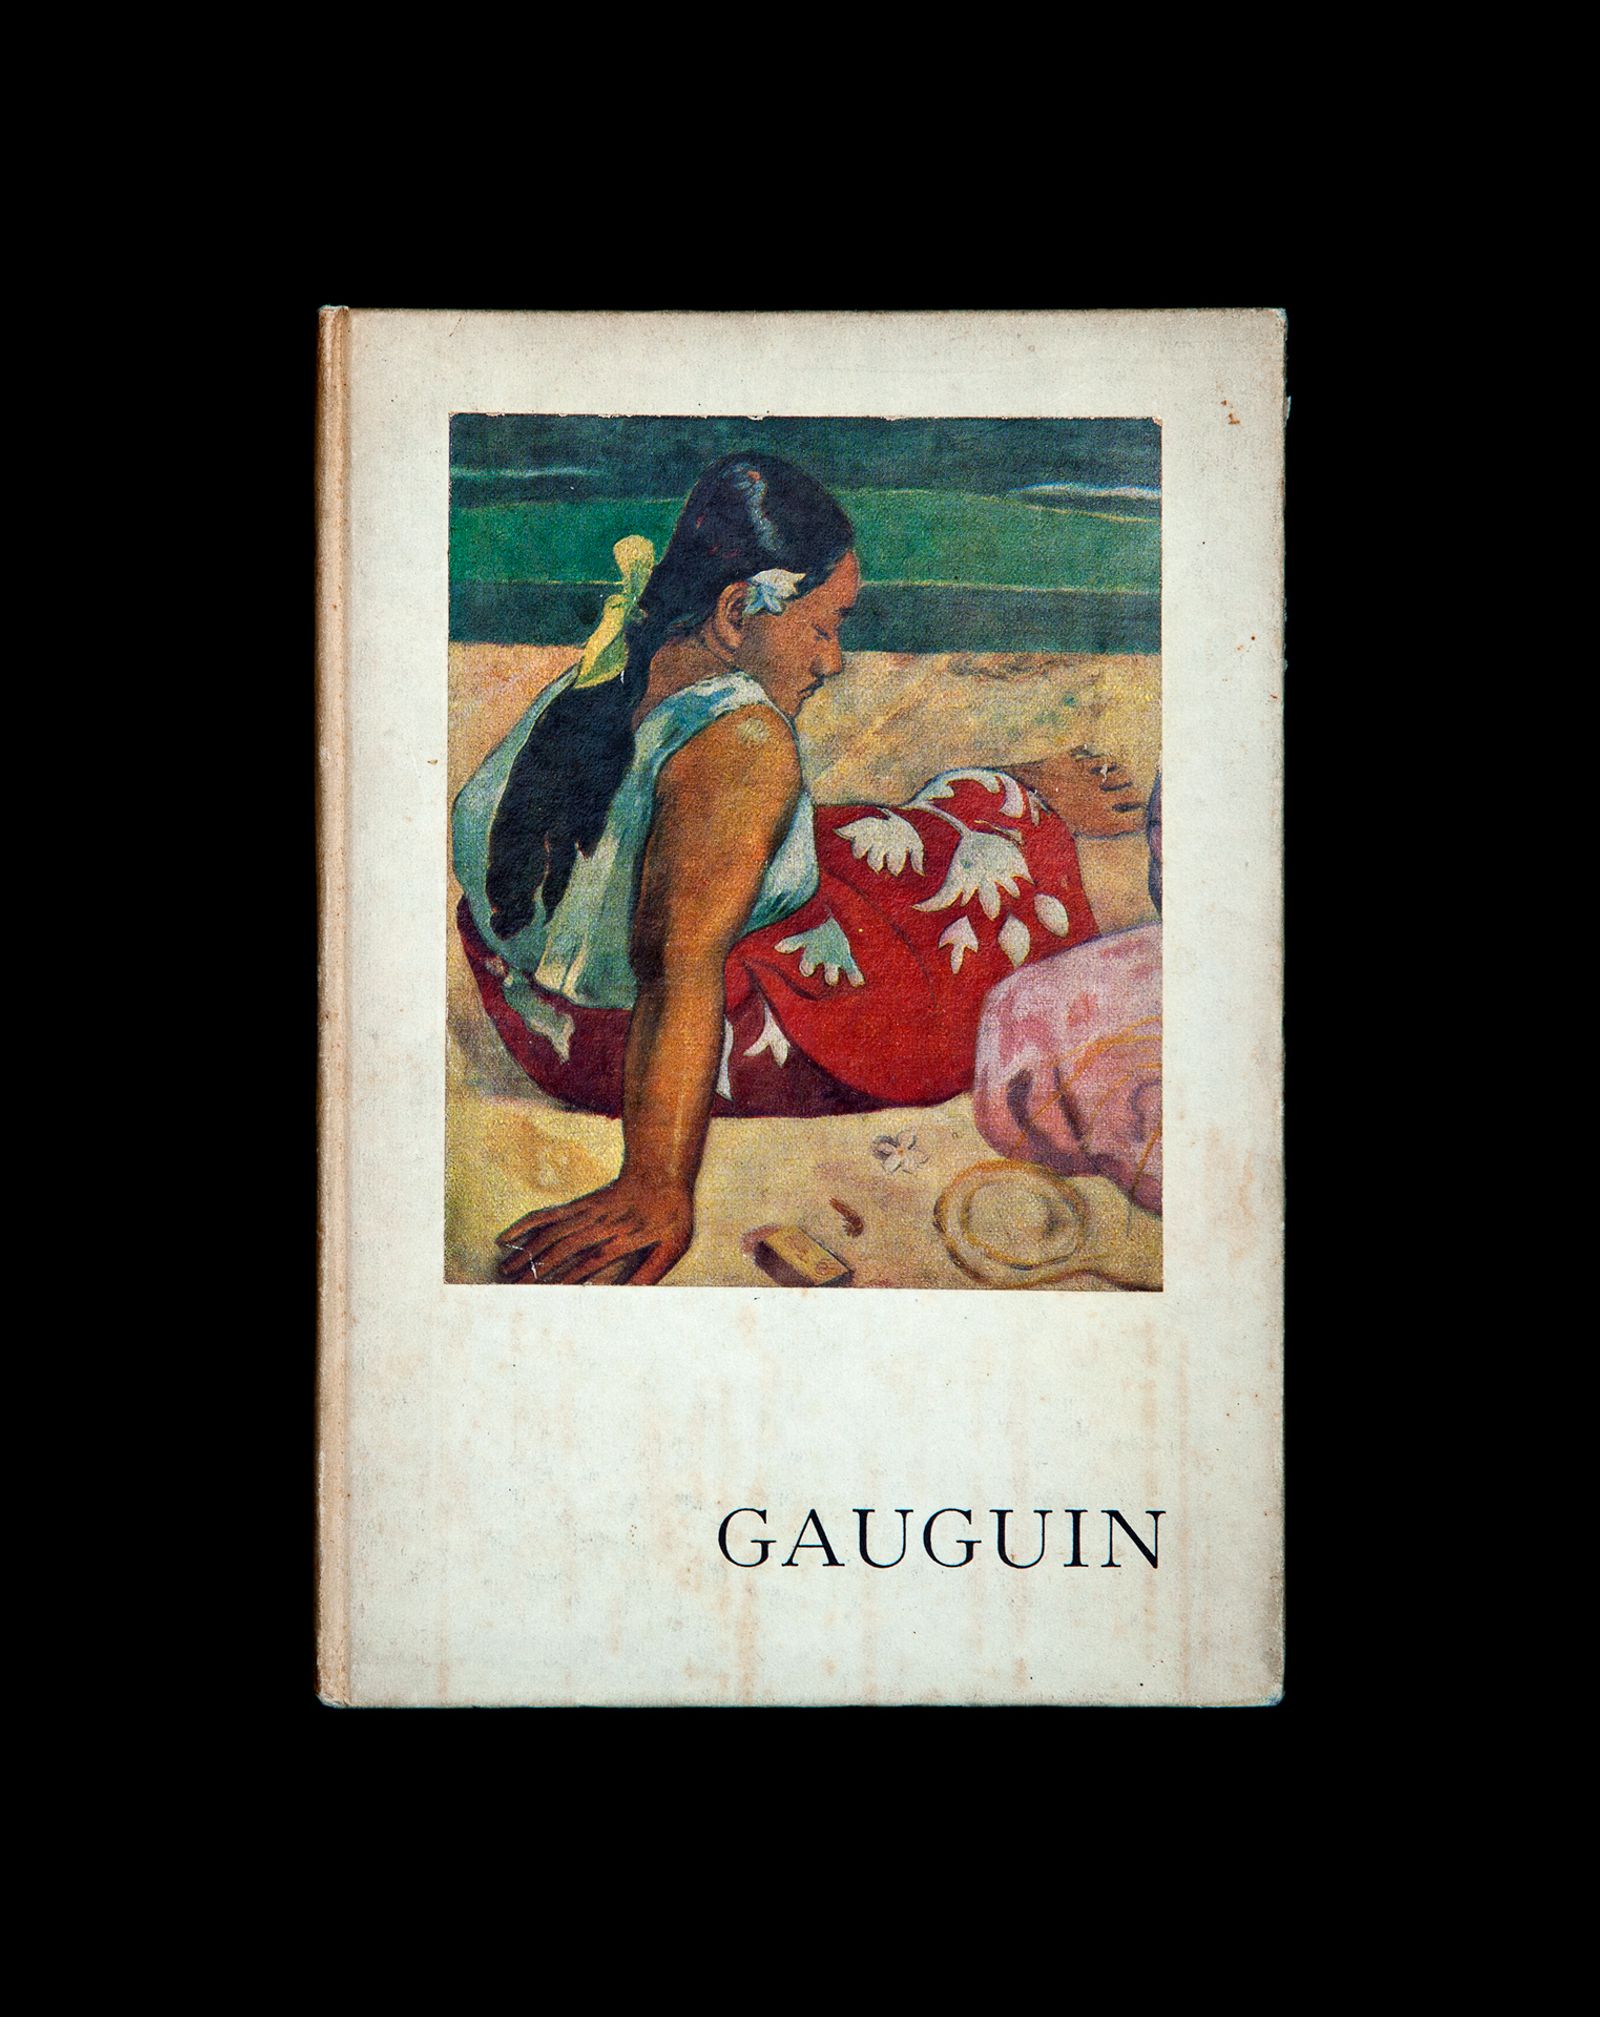 © Lihuel González - To listen to this audio book click on this link : https://archive.org/details/False_friends/gaugin.mp3